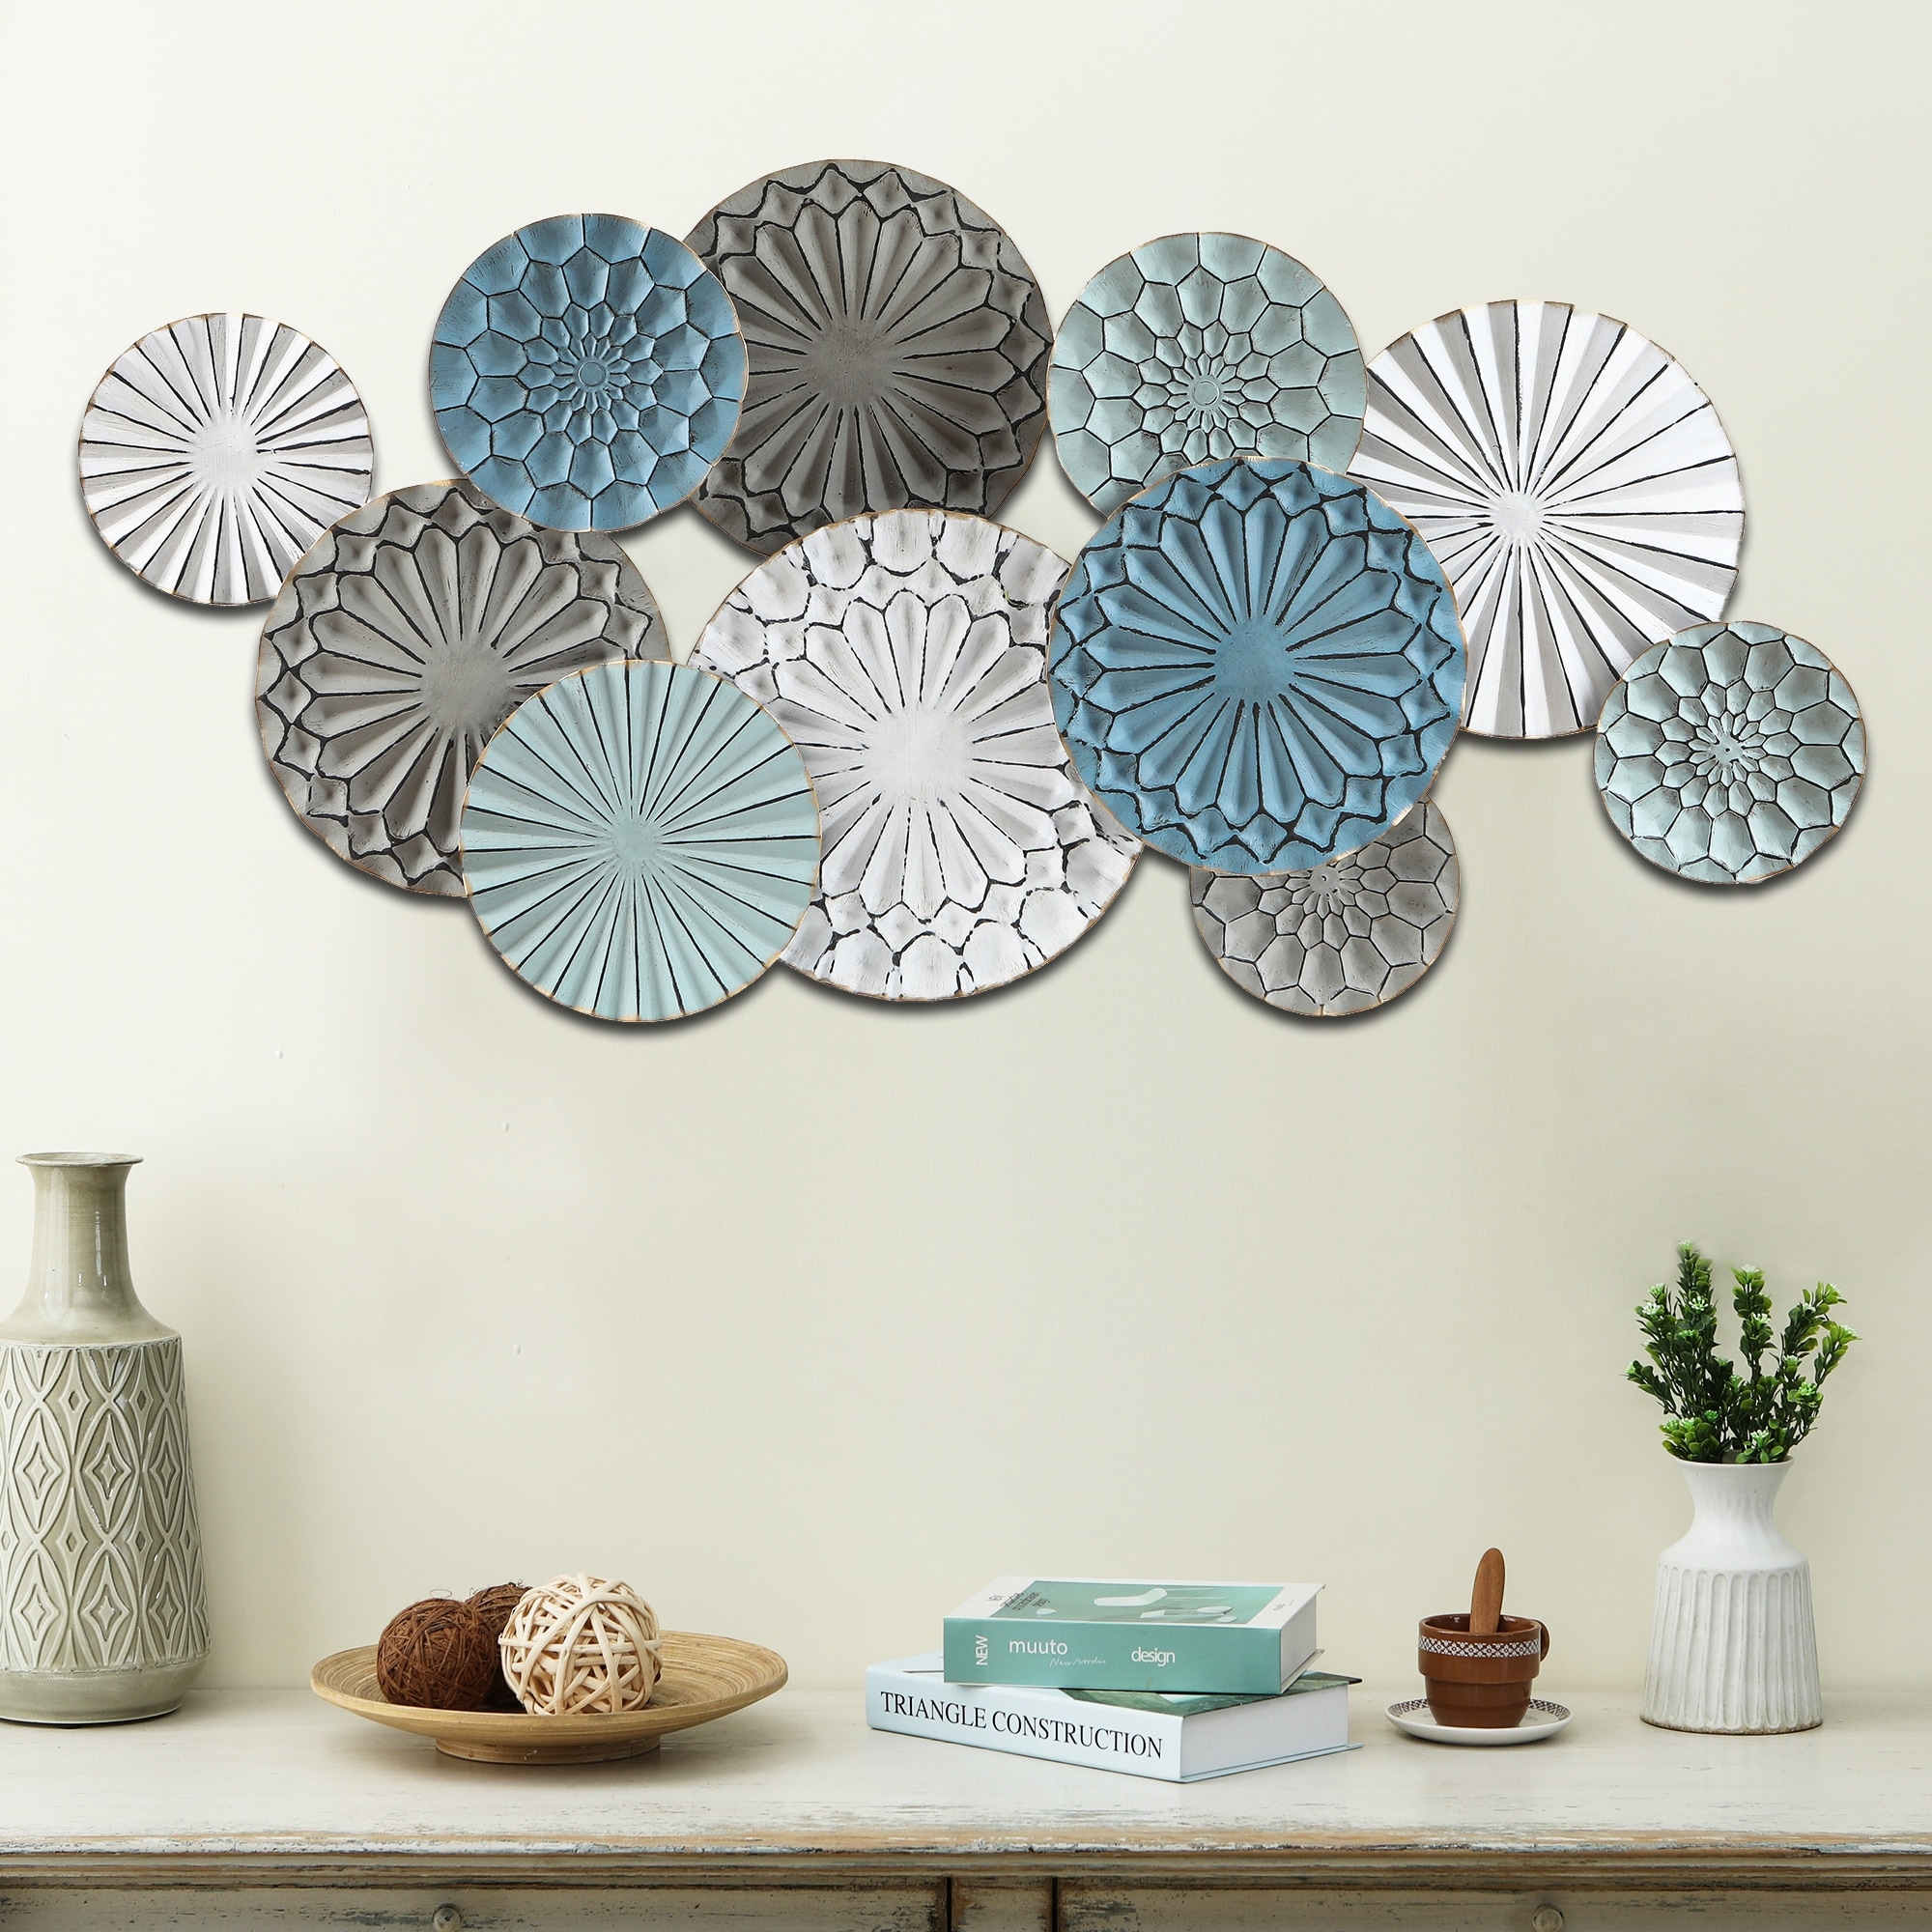 Multi-Color Metal Floral Layered Plates Wall Decor On Sale Bed Bath   Beyond 33285959